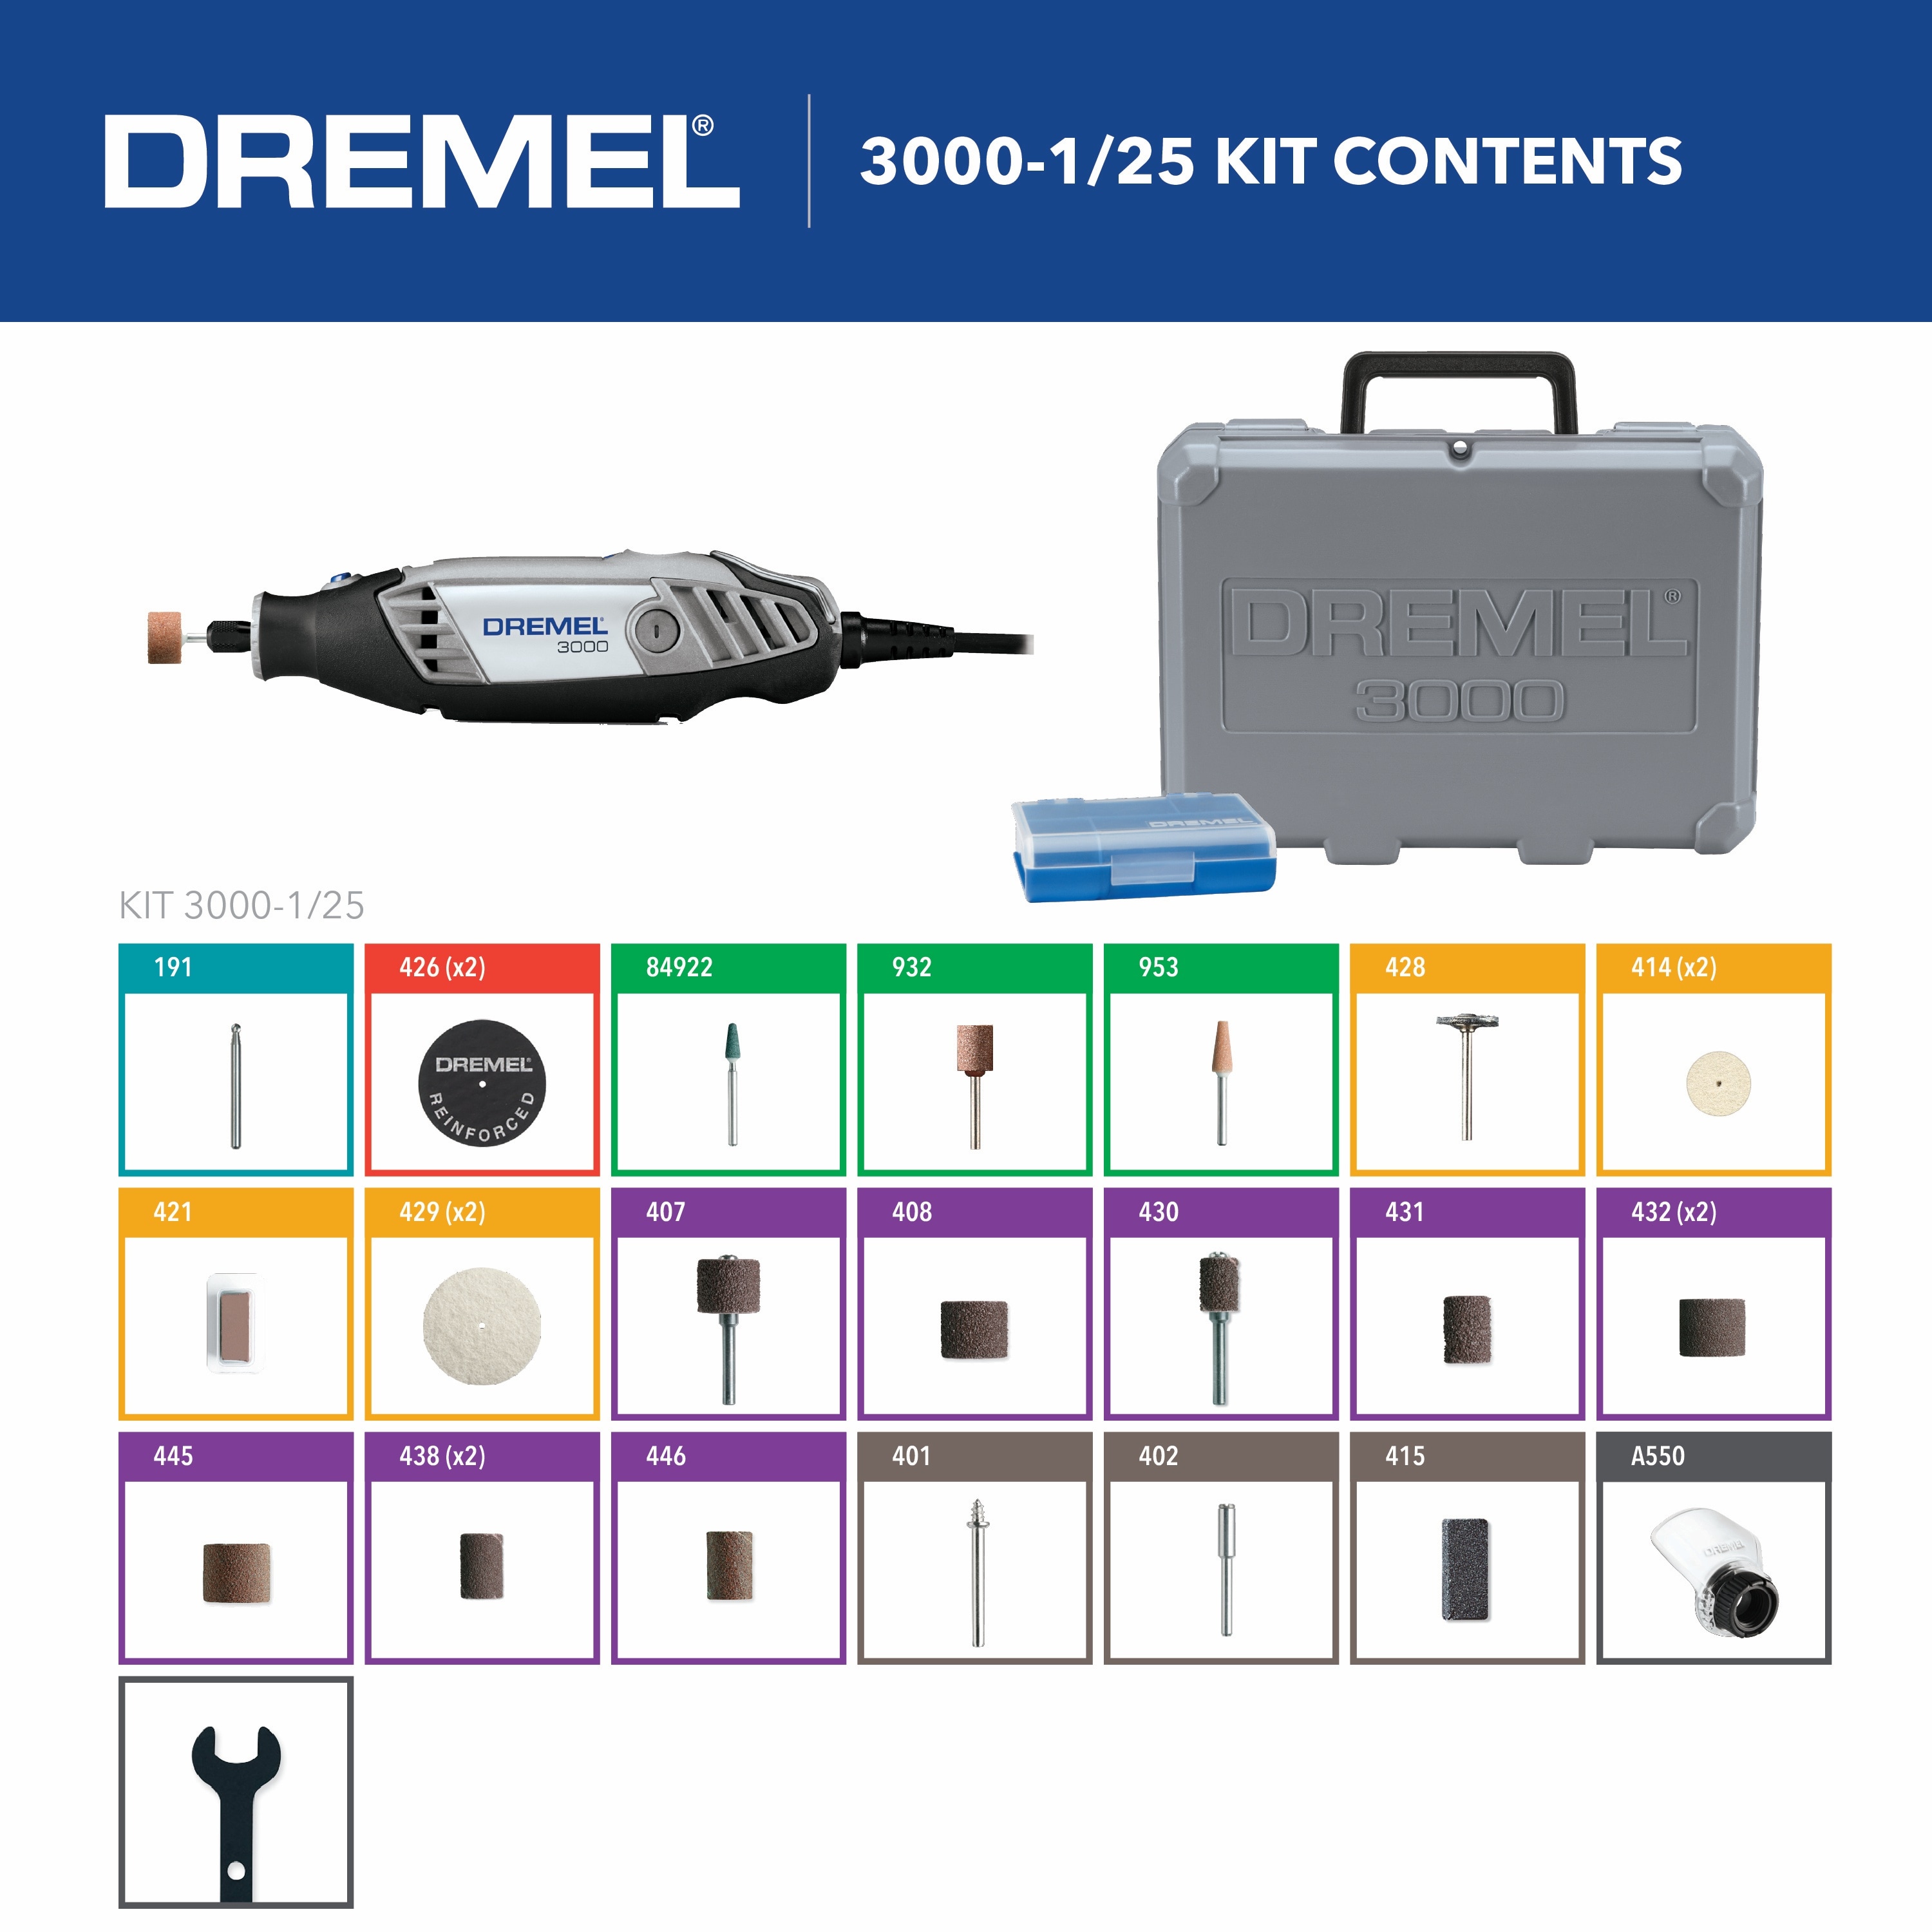 Dremel 3000-2/28 Rotary Tool Kit with Flex Shaft Attachment and MultiPro  Keyless Chuck 